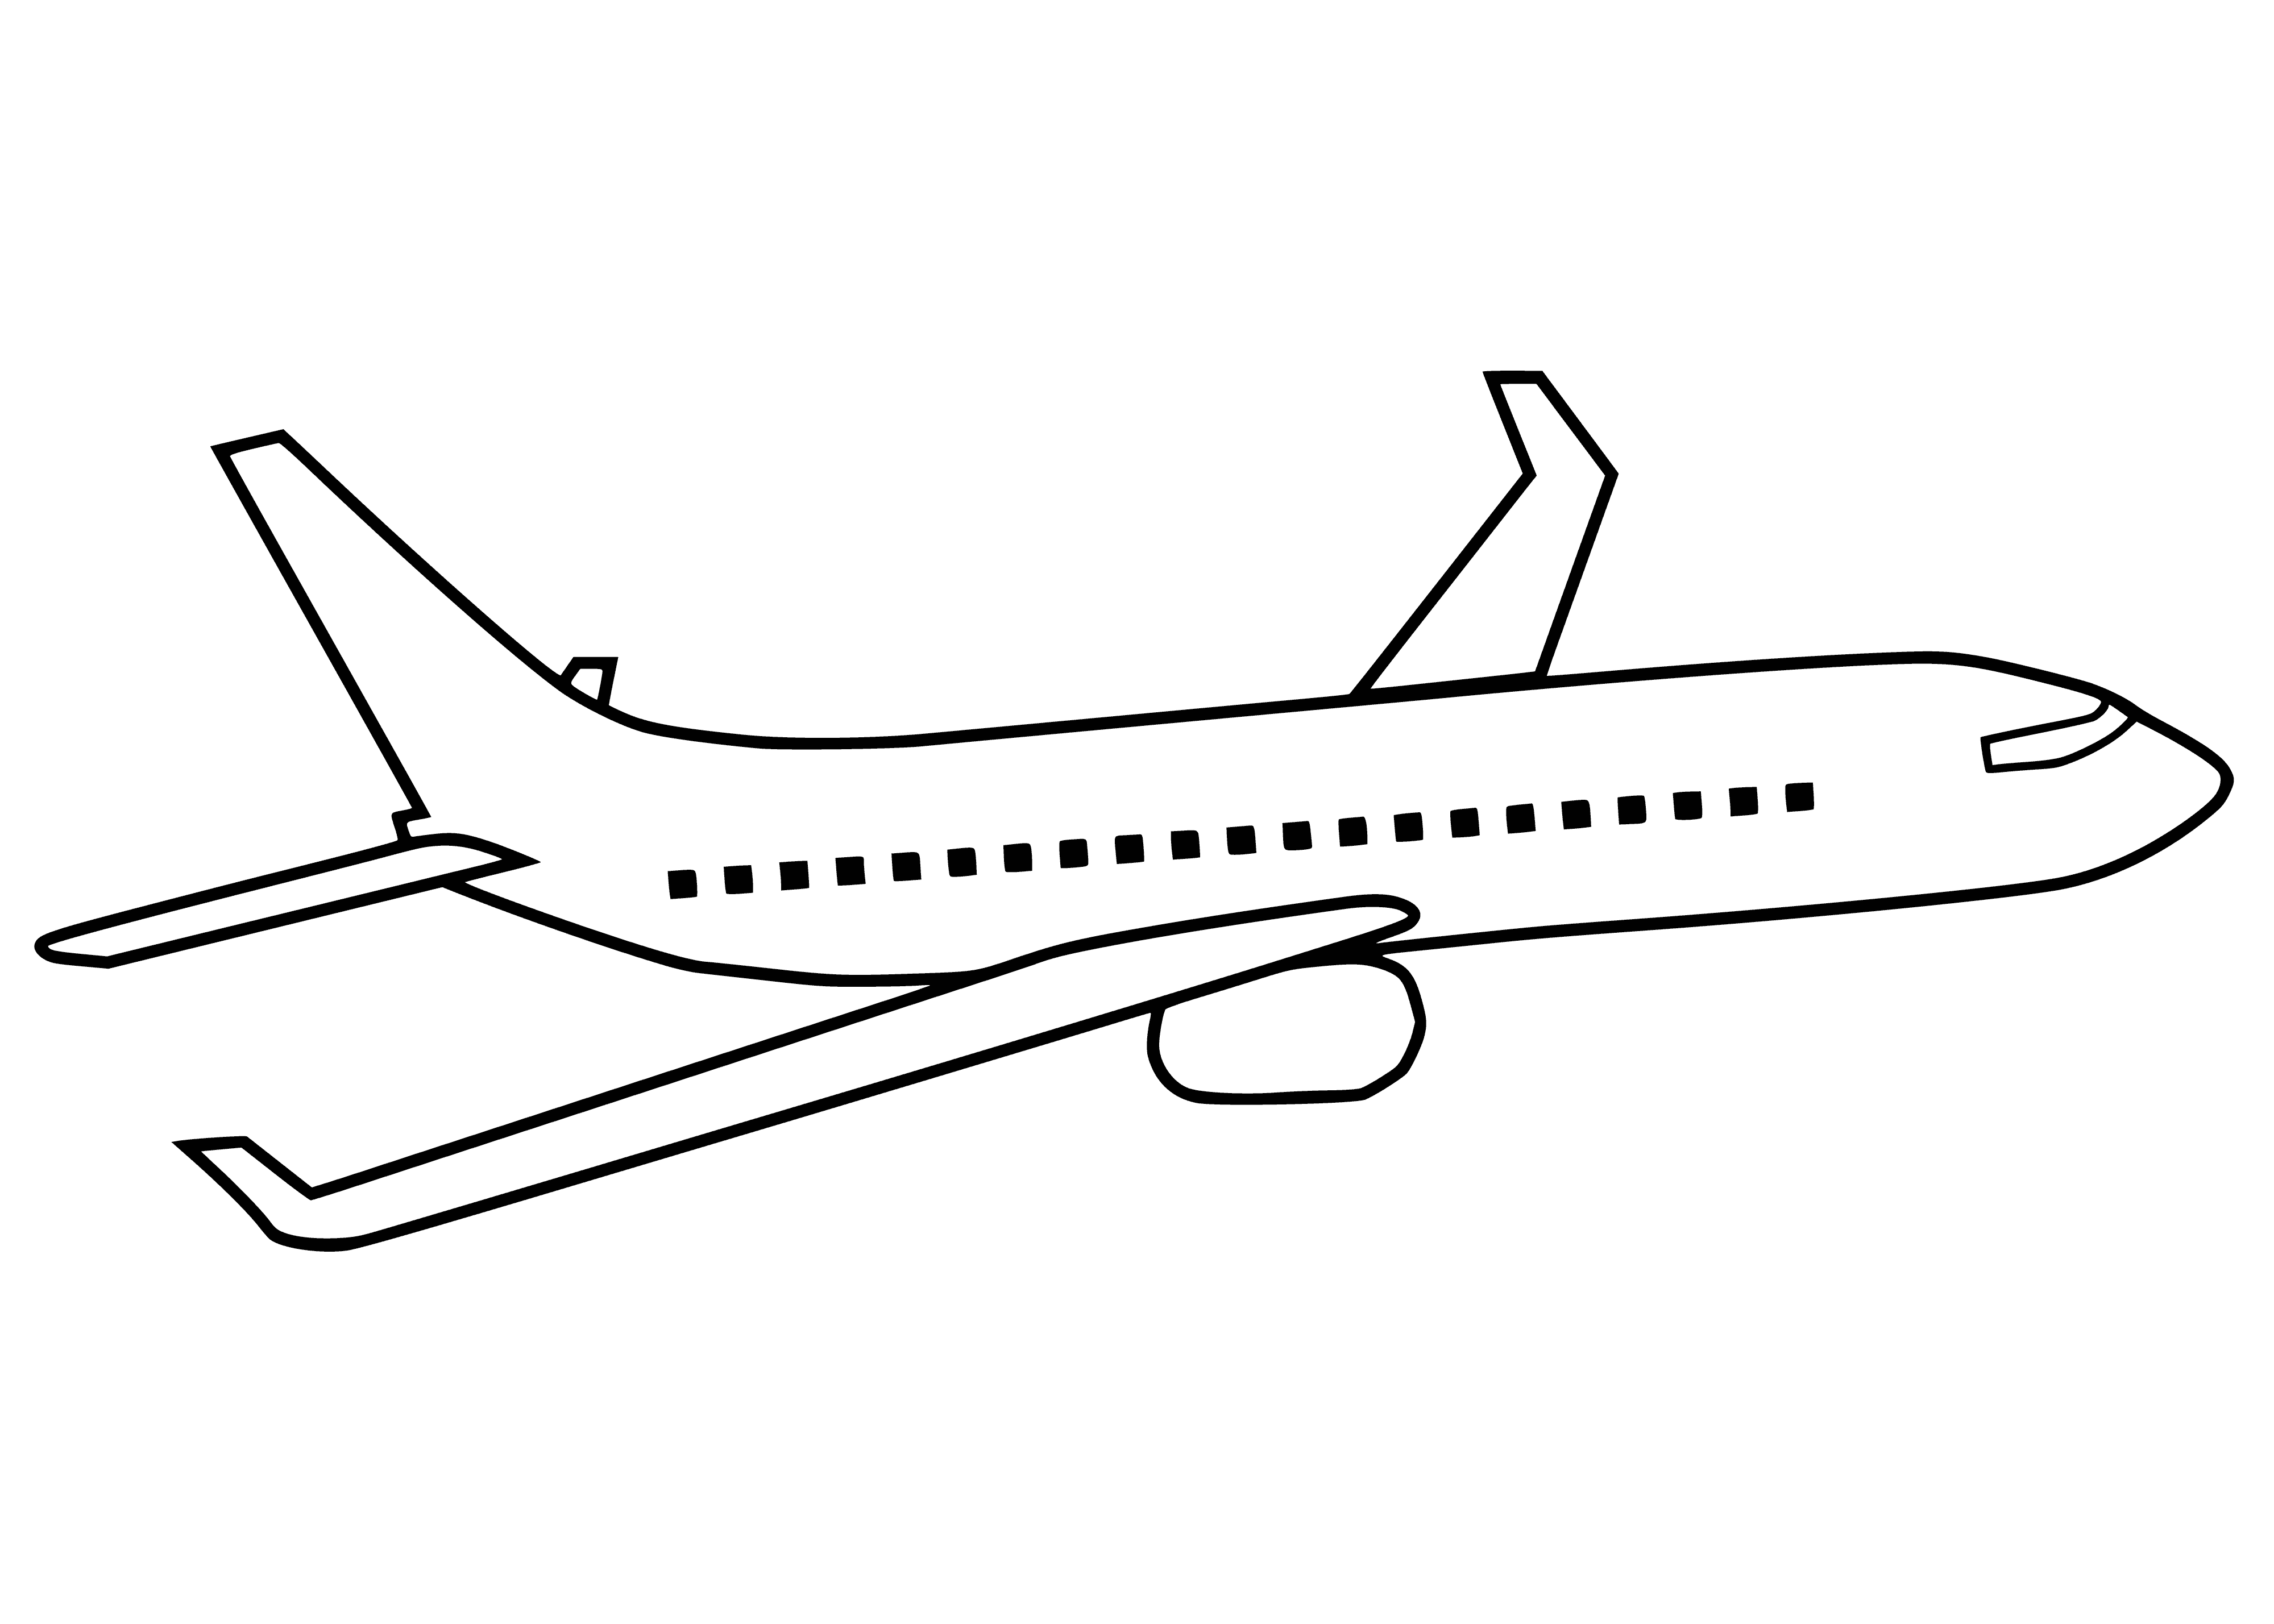 coloring page: A passenger plane transports people from one place to another and is usually equipped with comfy features such as reclining seats and large windows.